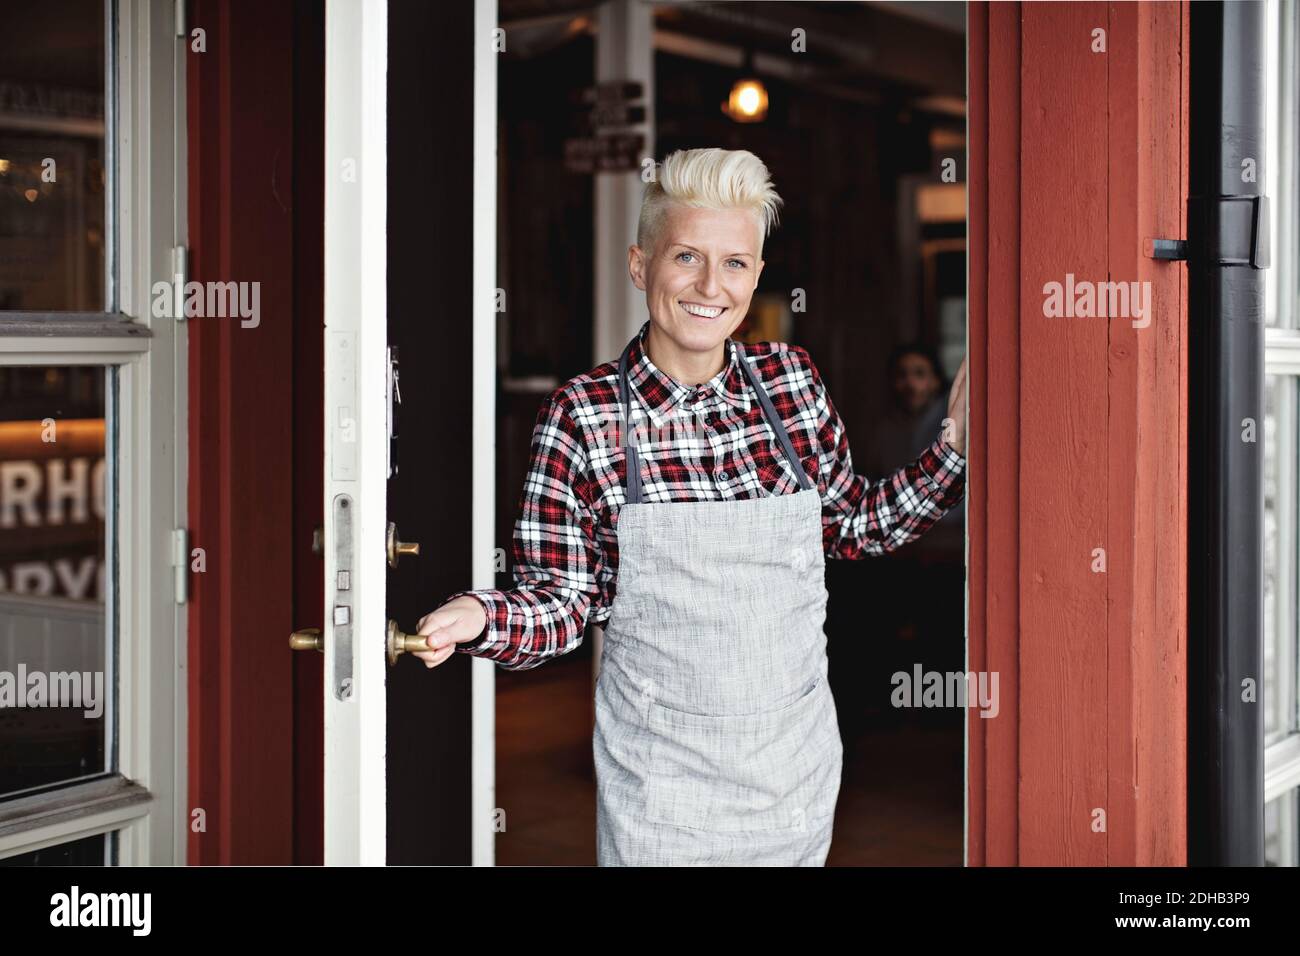 Portrait of smiling confident manual worker standing at doorway by restaurant Stock Photo